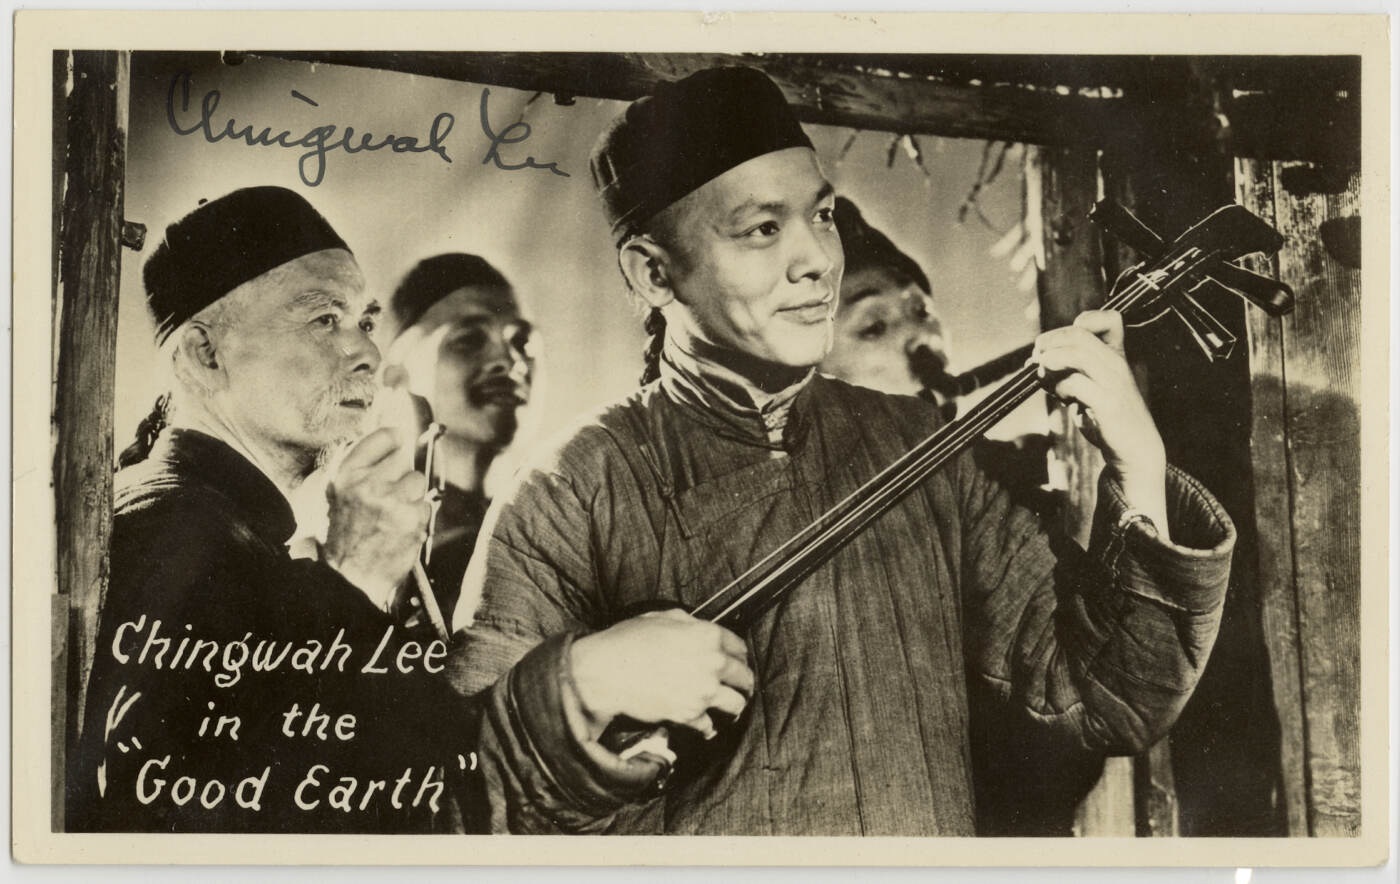 Post Card. Courtesy of Sam Kohl, Museum of Chinese in America (MOCA) Collection.